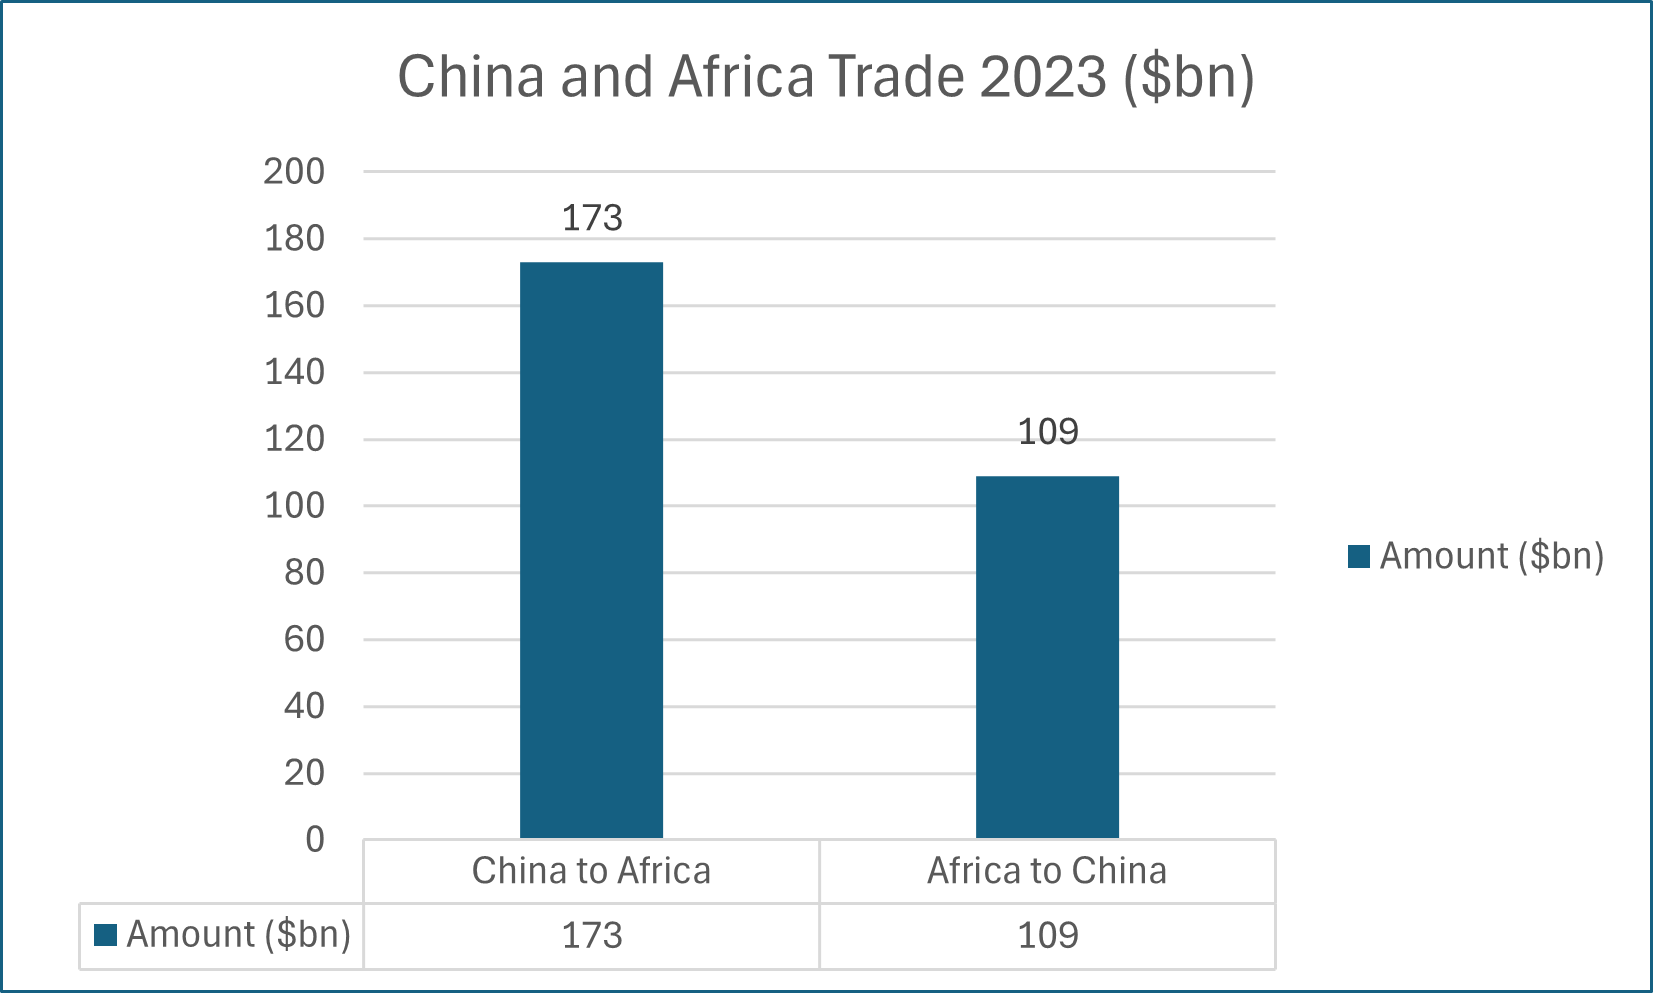 China and Africa trade